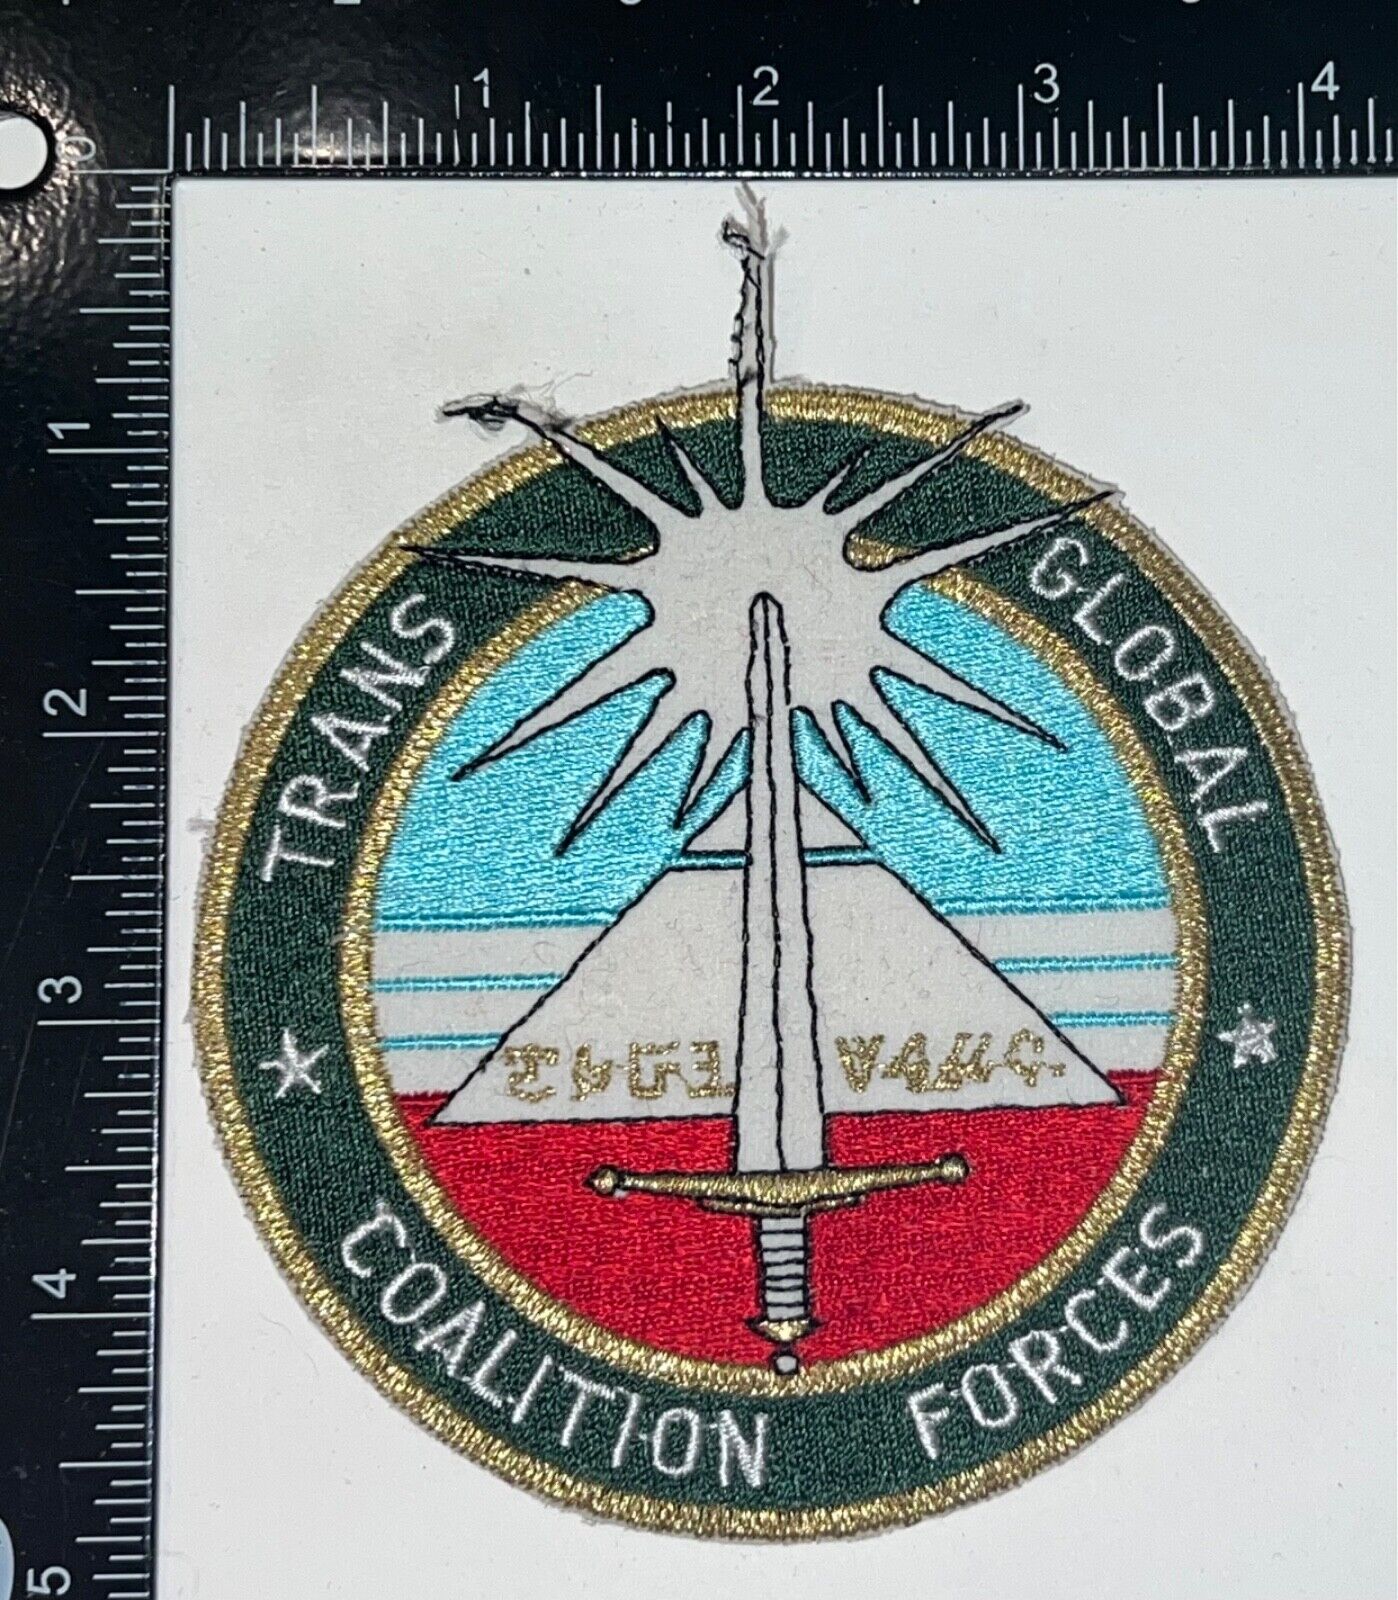 Operation Desert Storm Trans Global Coalition Forces Patch